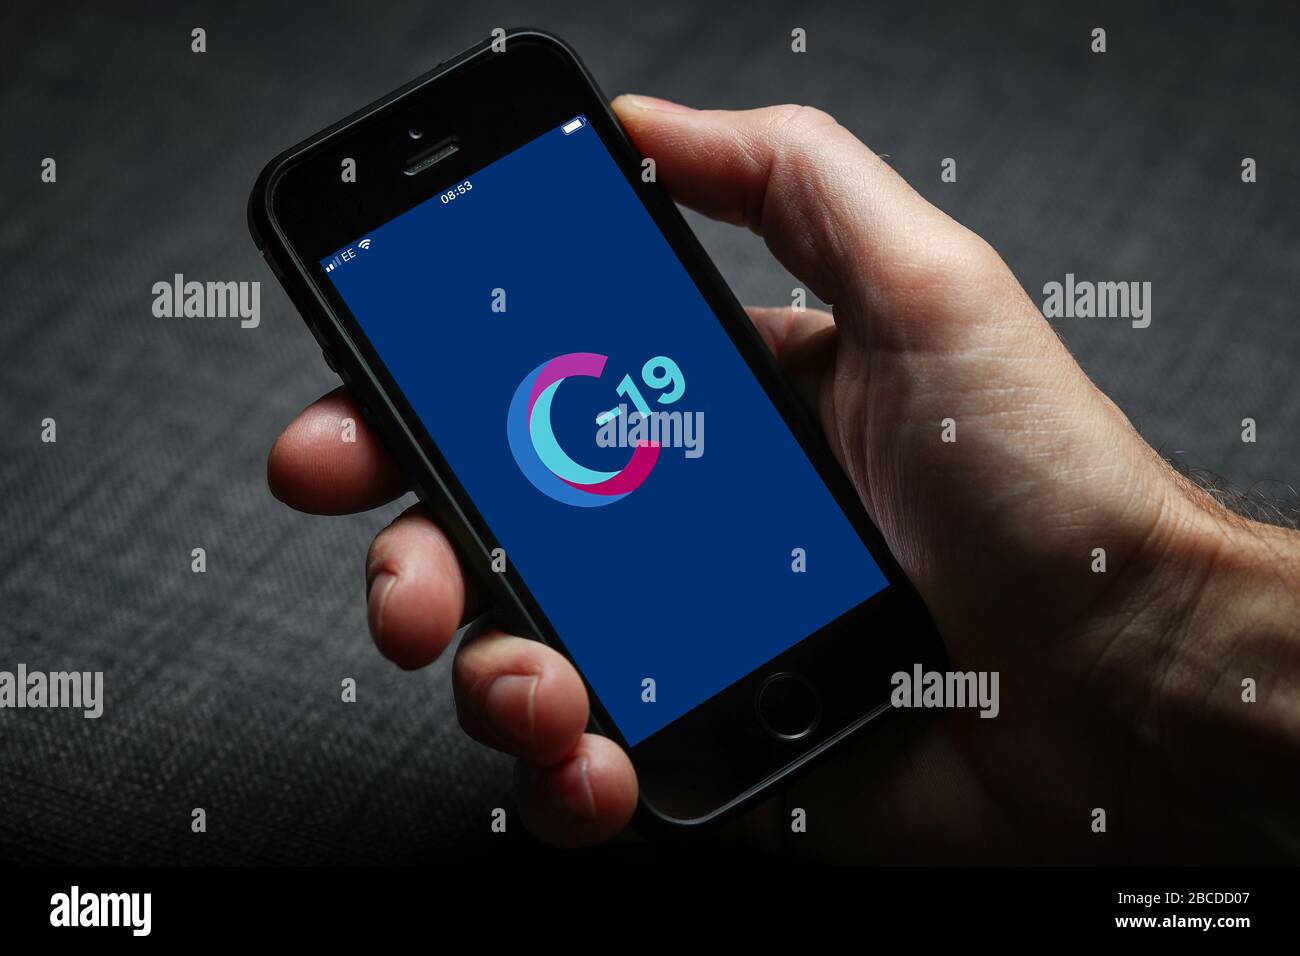 Covid sympton tracker app on an iPhone in the UK. Stock Photo